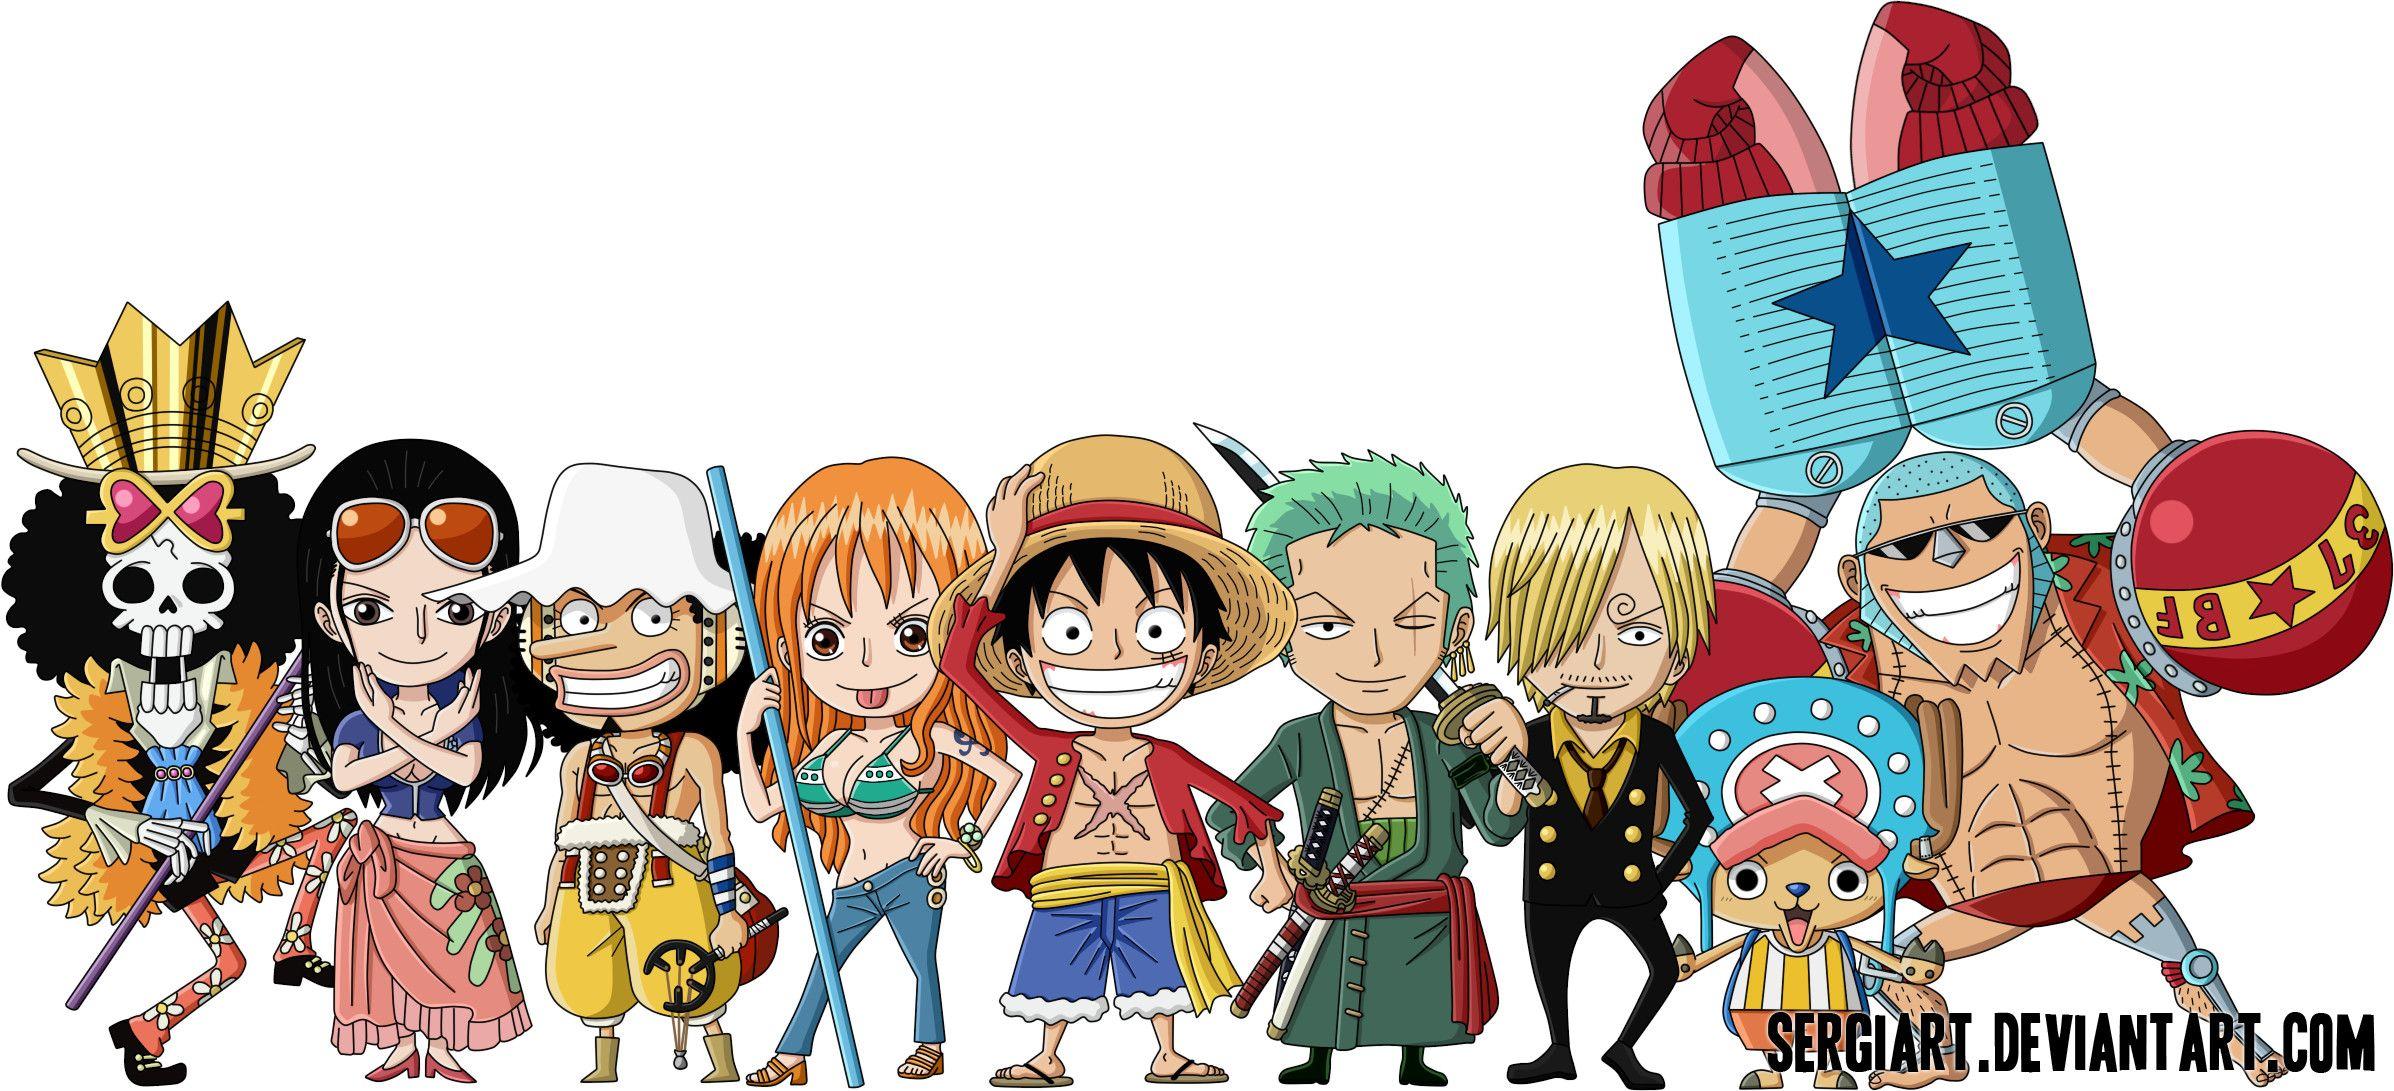 Chibi One Piece Wallpapers - Top Free Chibi One Piece Backgrounds ...